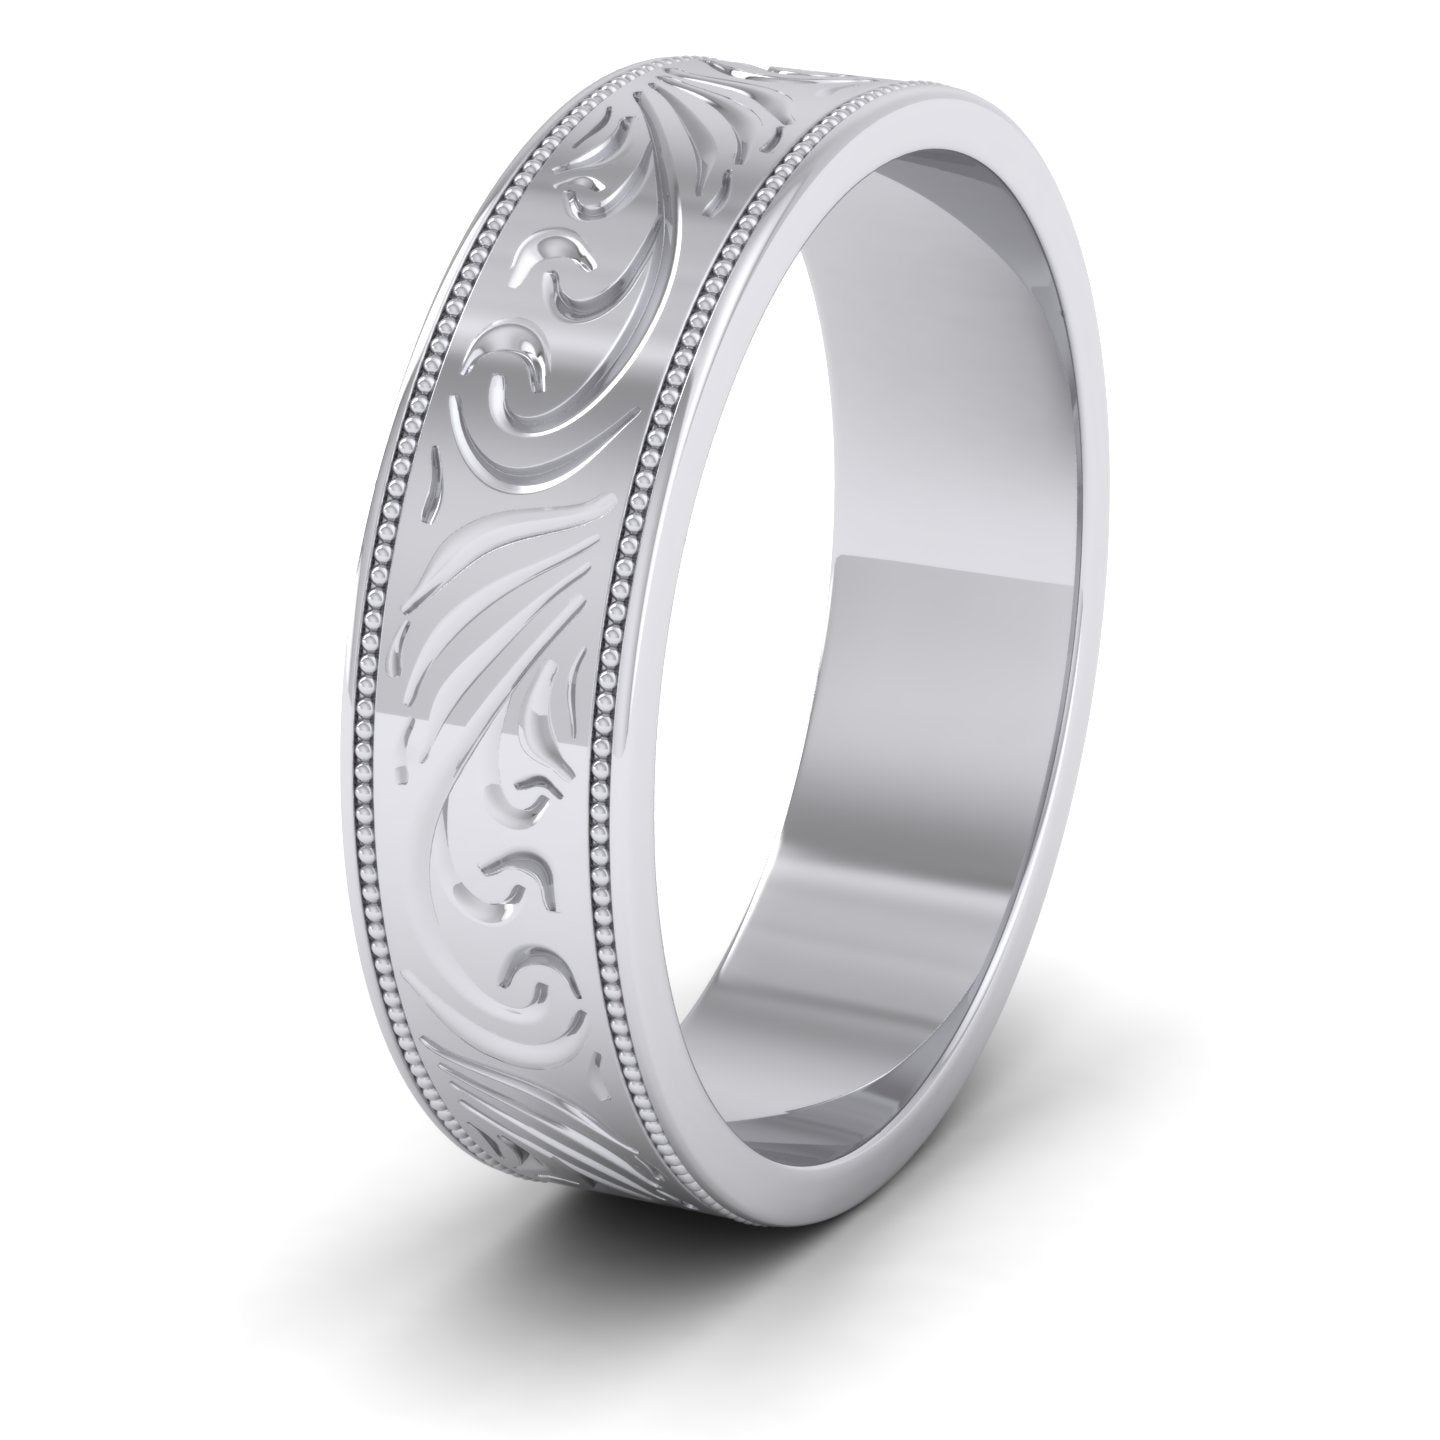 Engraved 18ct White Gold 6mm Flat Wedding Ring With Millgrain Edge